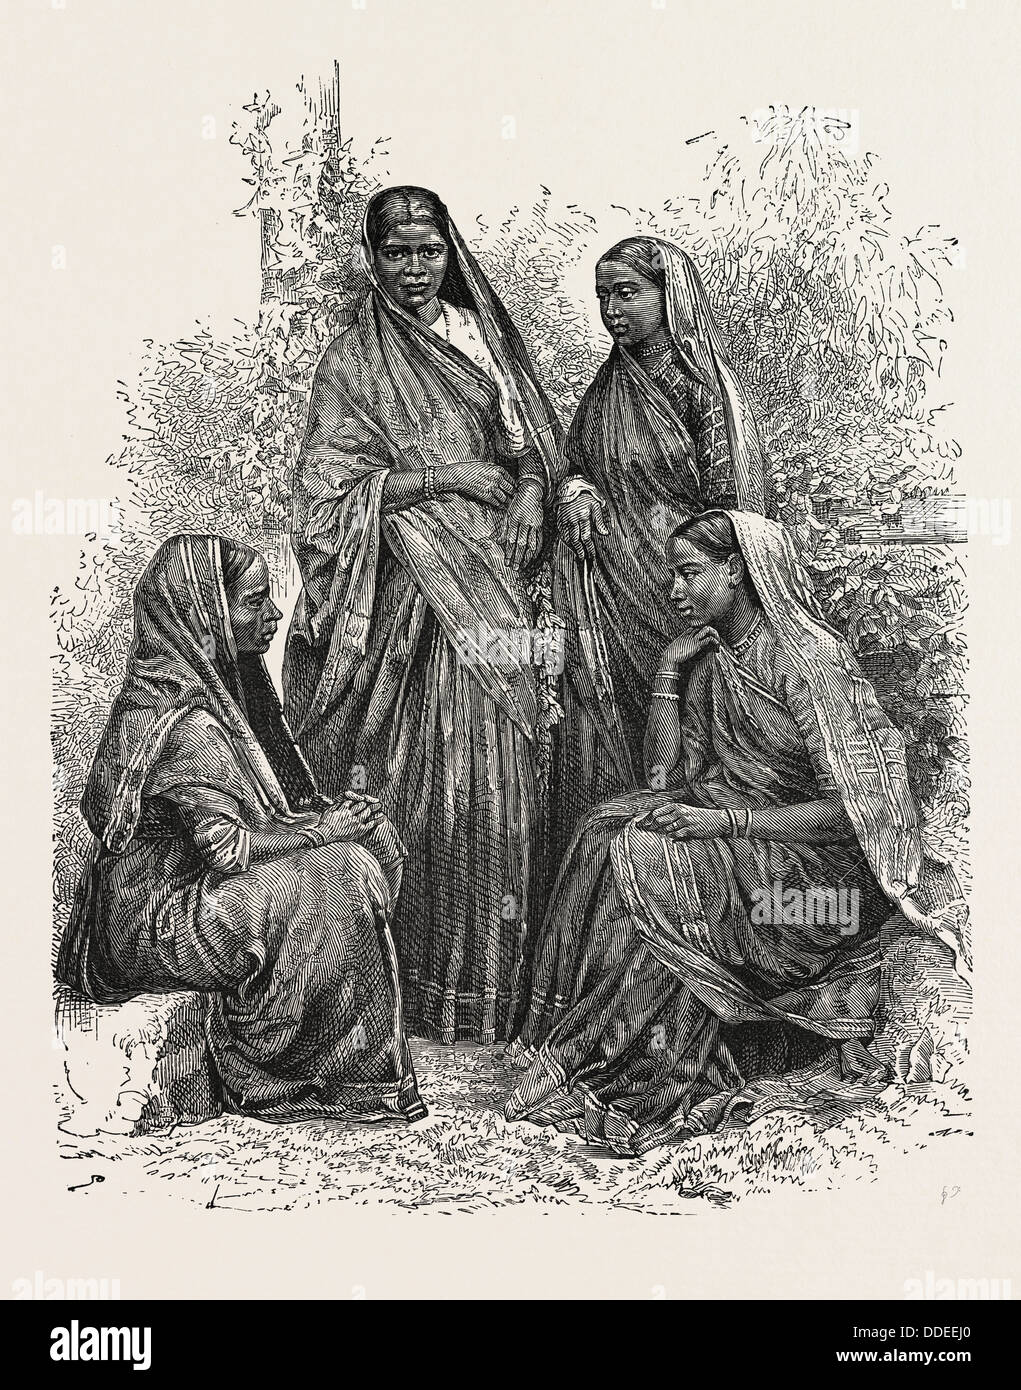 NATIVE WOMEN (BOMBAY PRESIDENCY), CONVERTS TO CHRISTIANITY. The Bombay Presidency was a province of British India Stock Photo